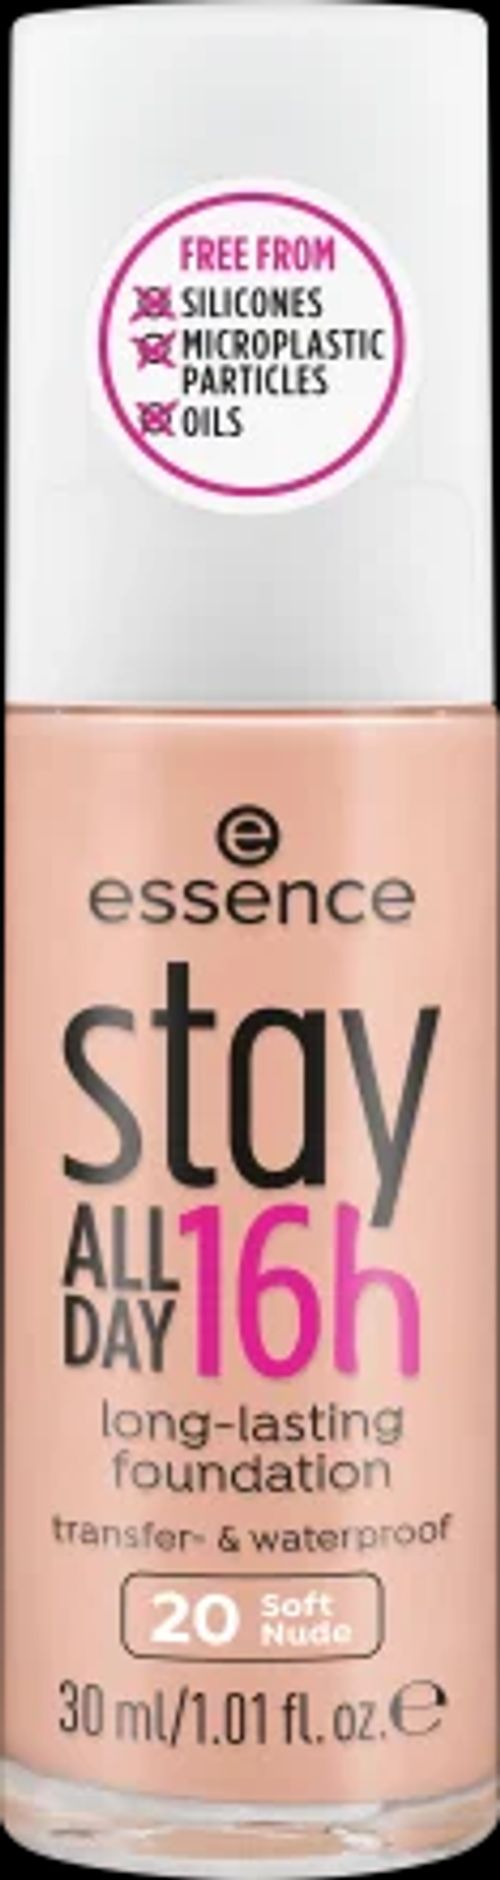 Stay All Day 16h long-lasting